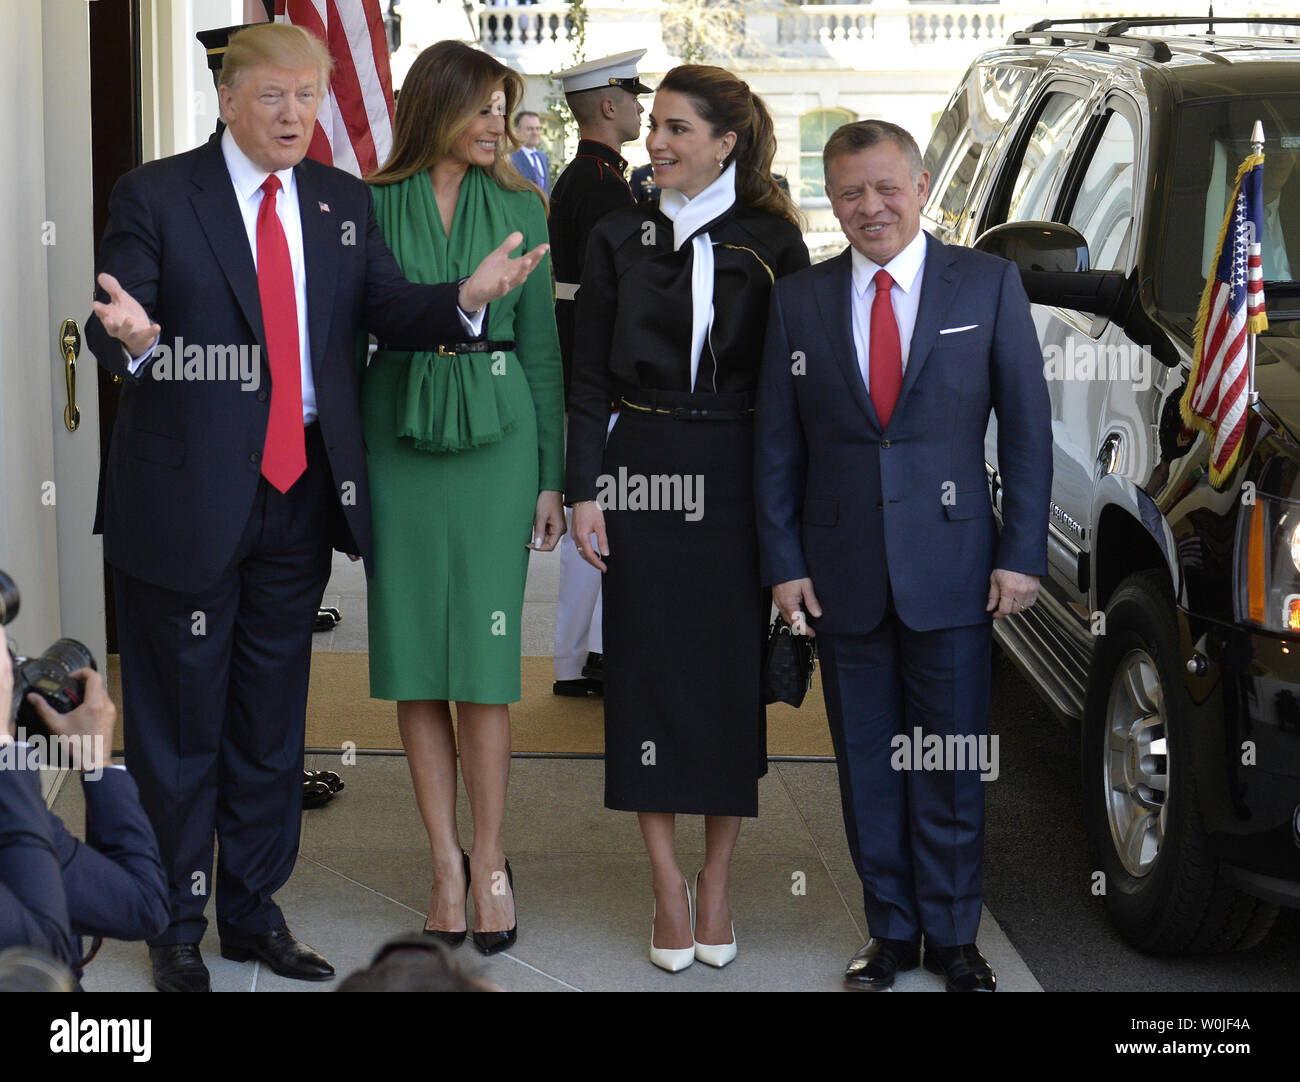 Page 2 - Queen Rania High Resolution Stock Photography and Images - Alamy